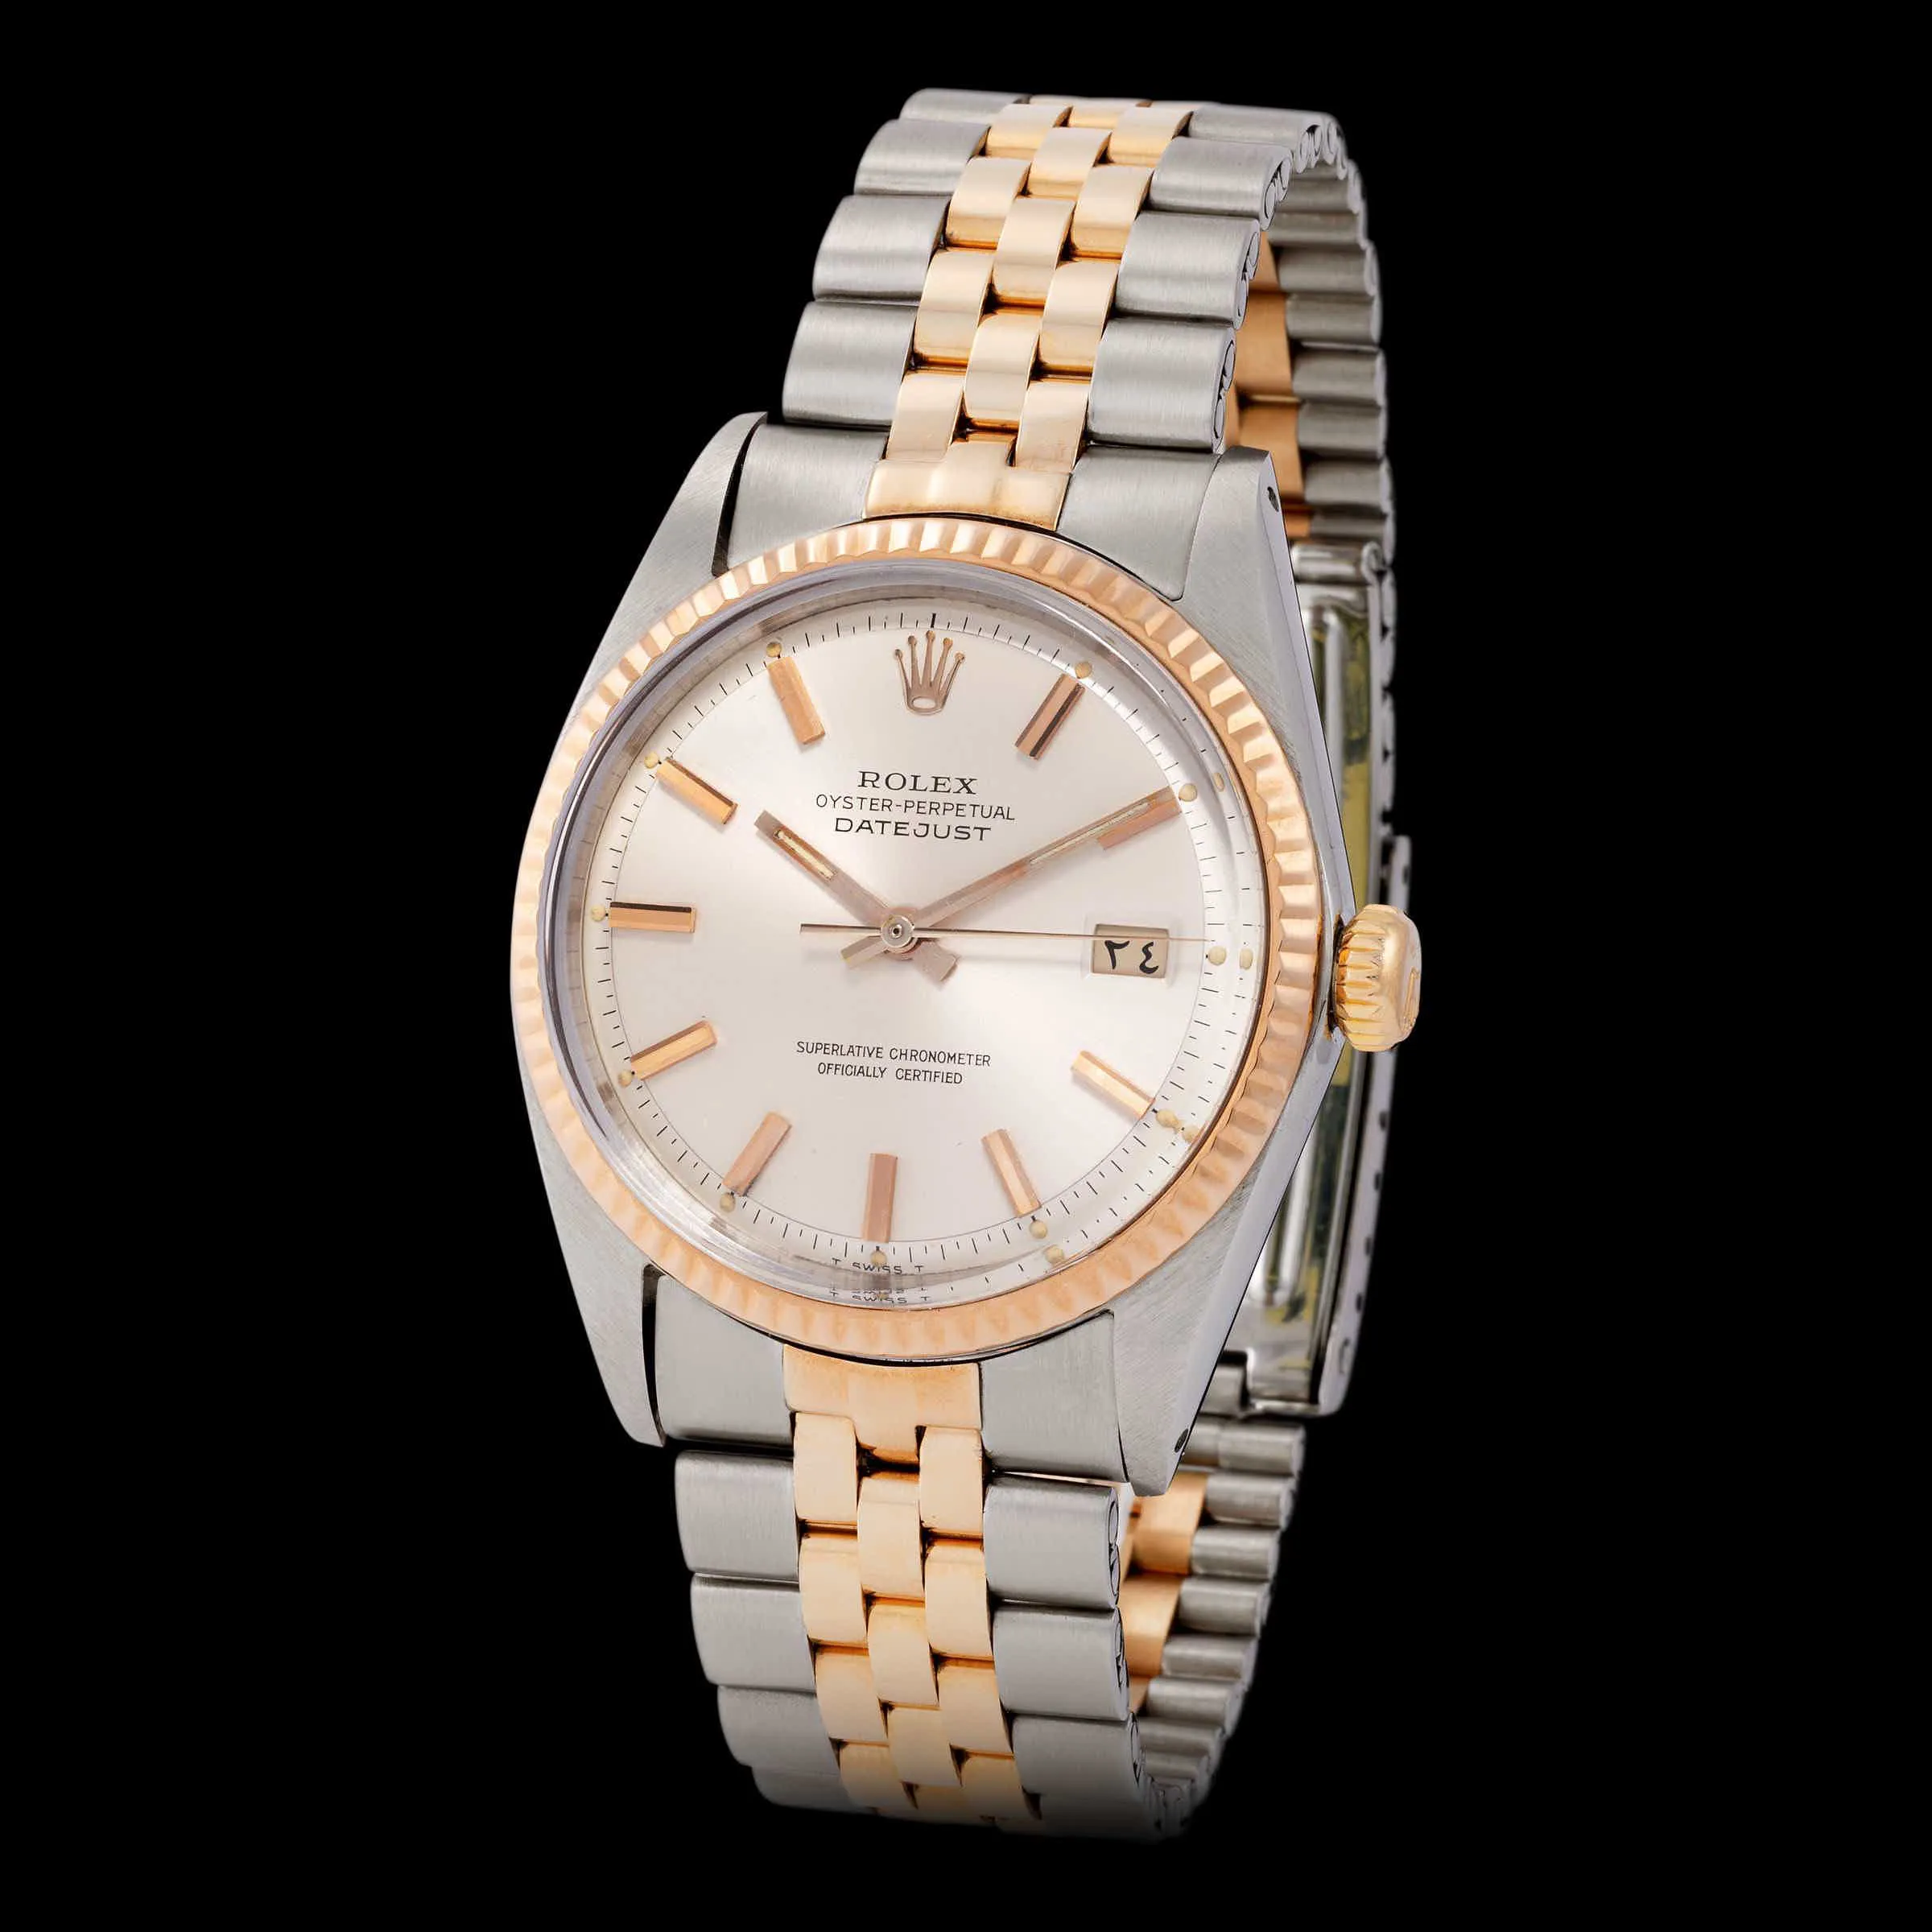 Rolex Datejust 1601 36mm Stainless steel and rose gold